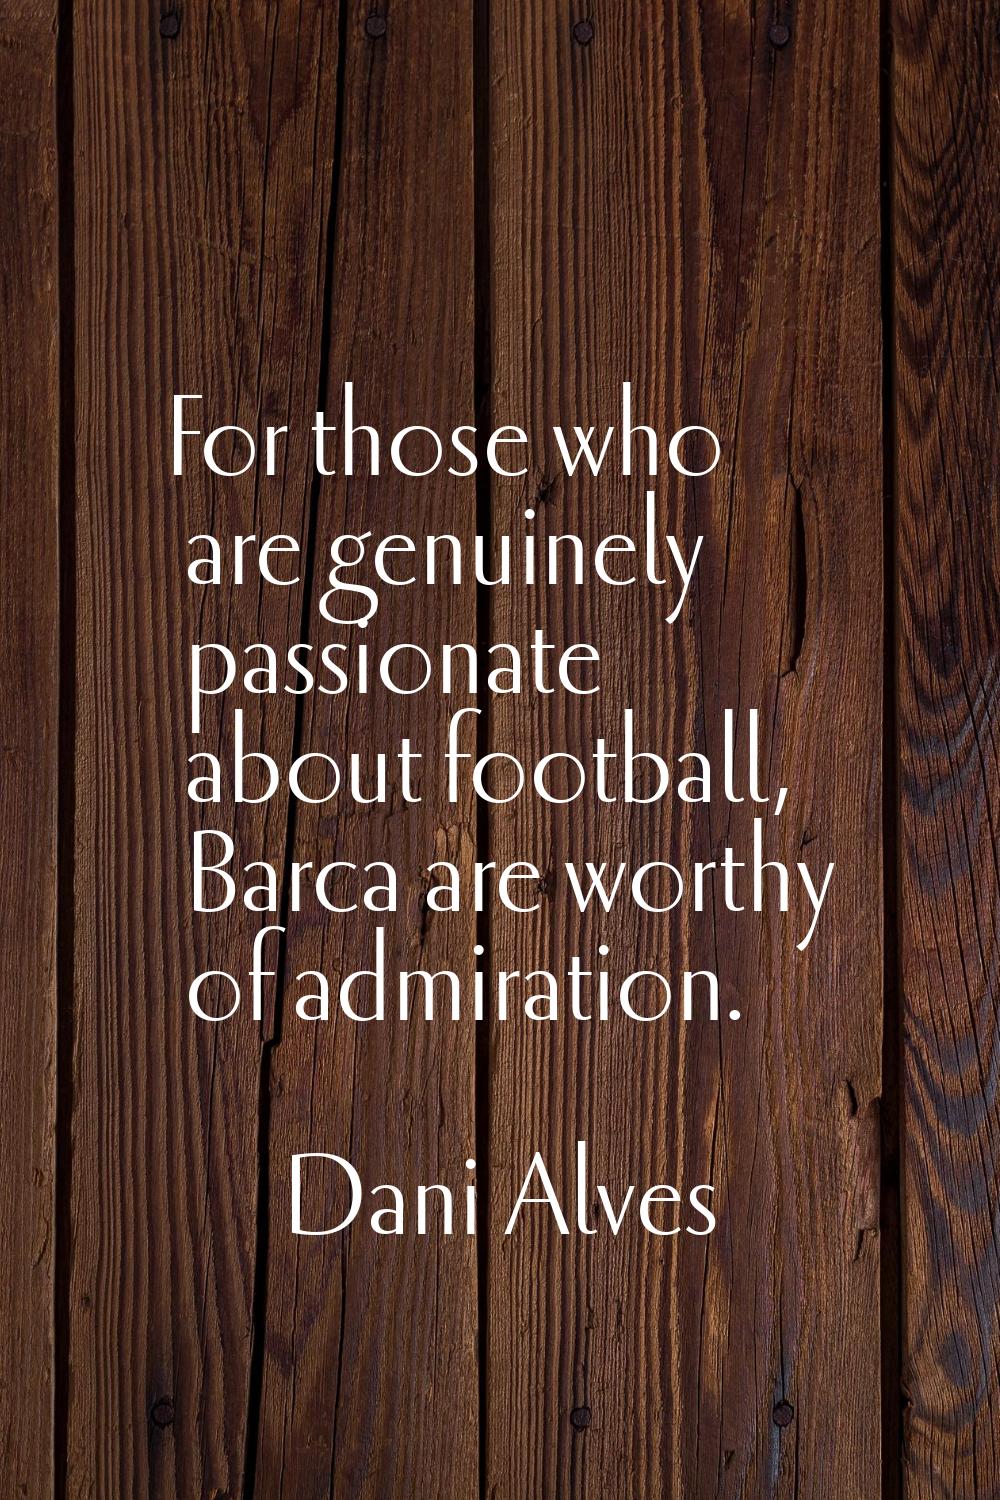 For those who are genuinely passionate about football, Barca are worthy of admiration.